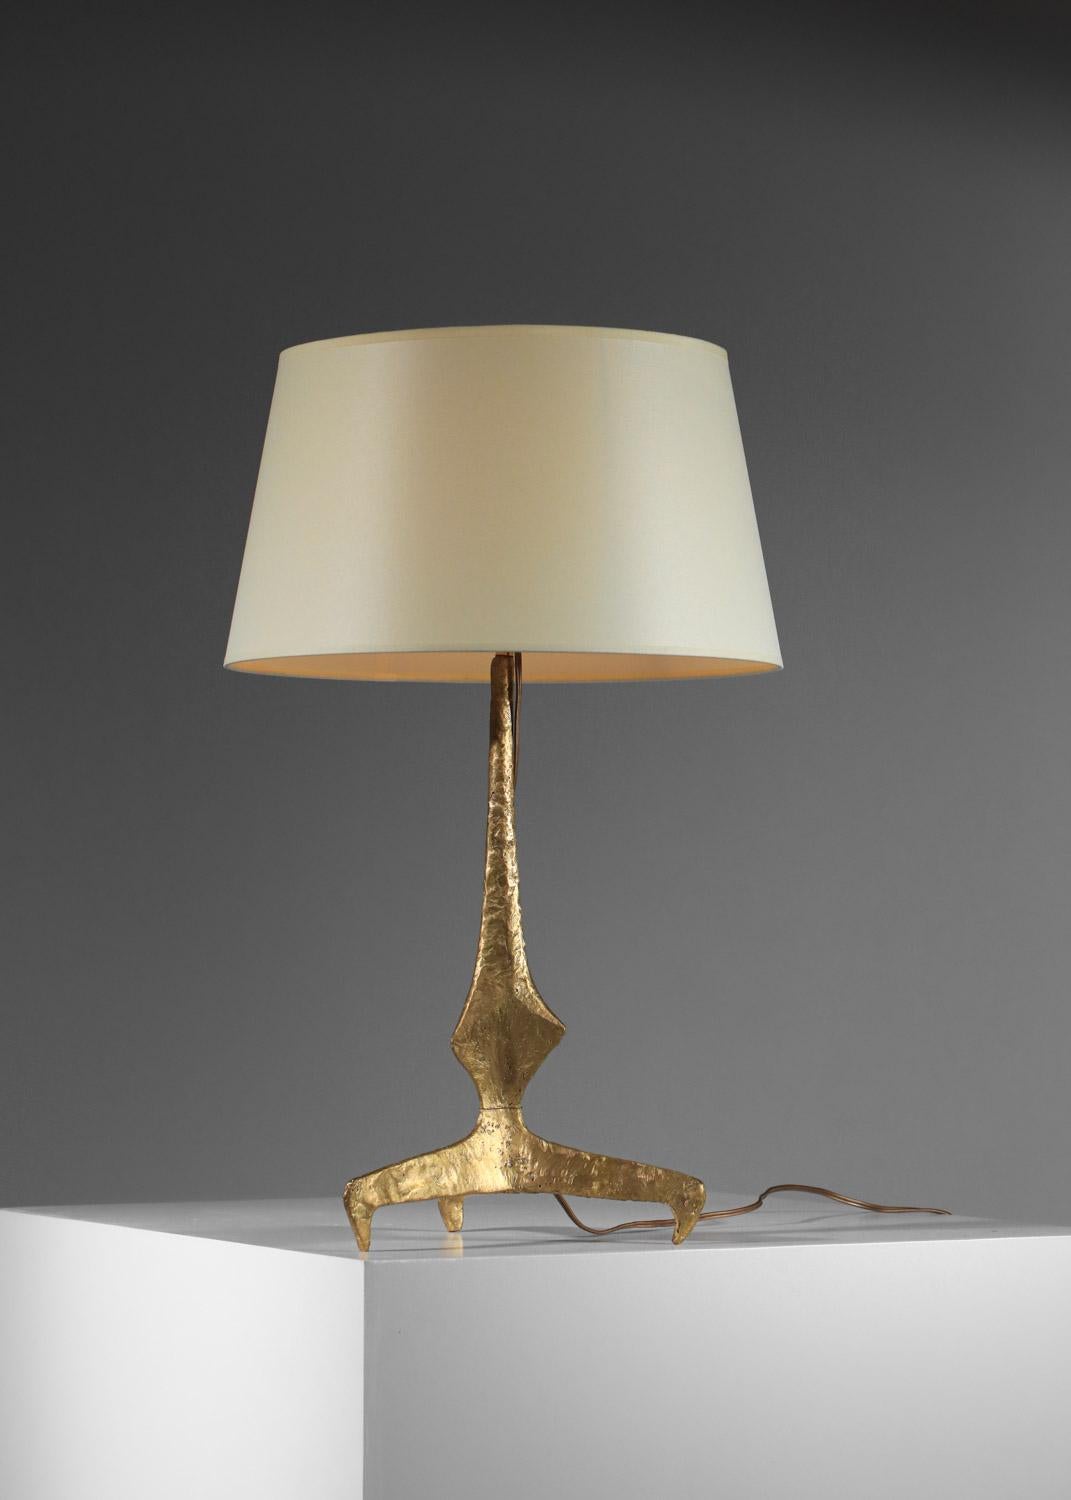 Mid-Century Modern Gilt bronze table lamp in the Felix Agostini style, tripod-shaped  For Sale